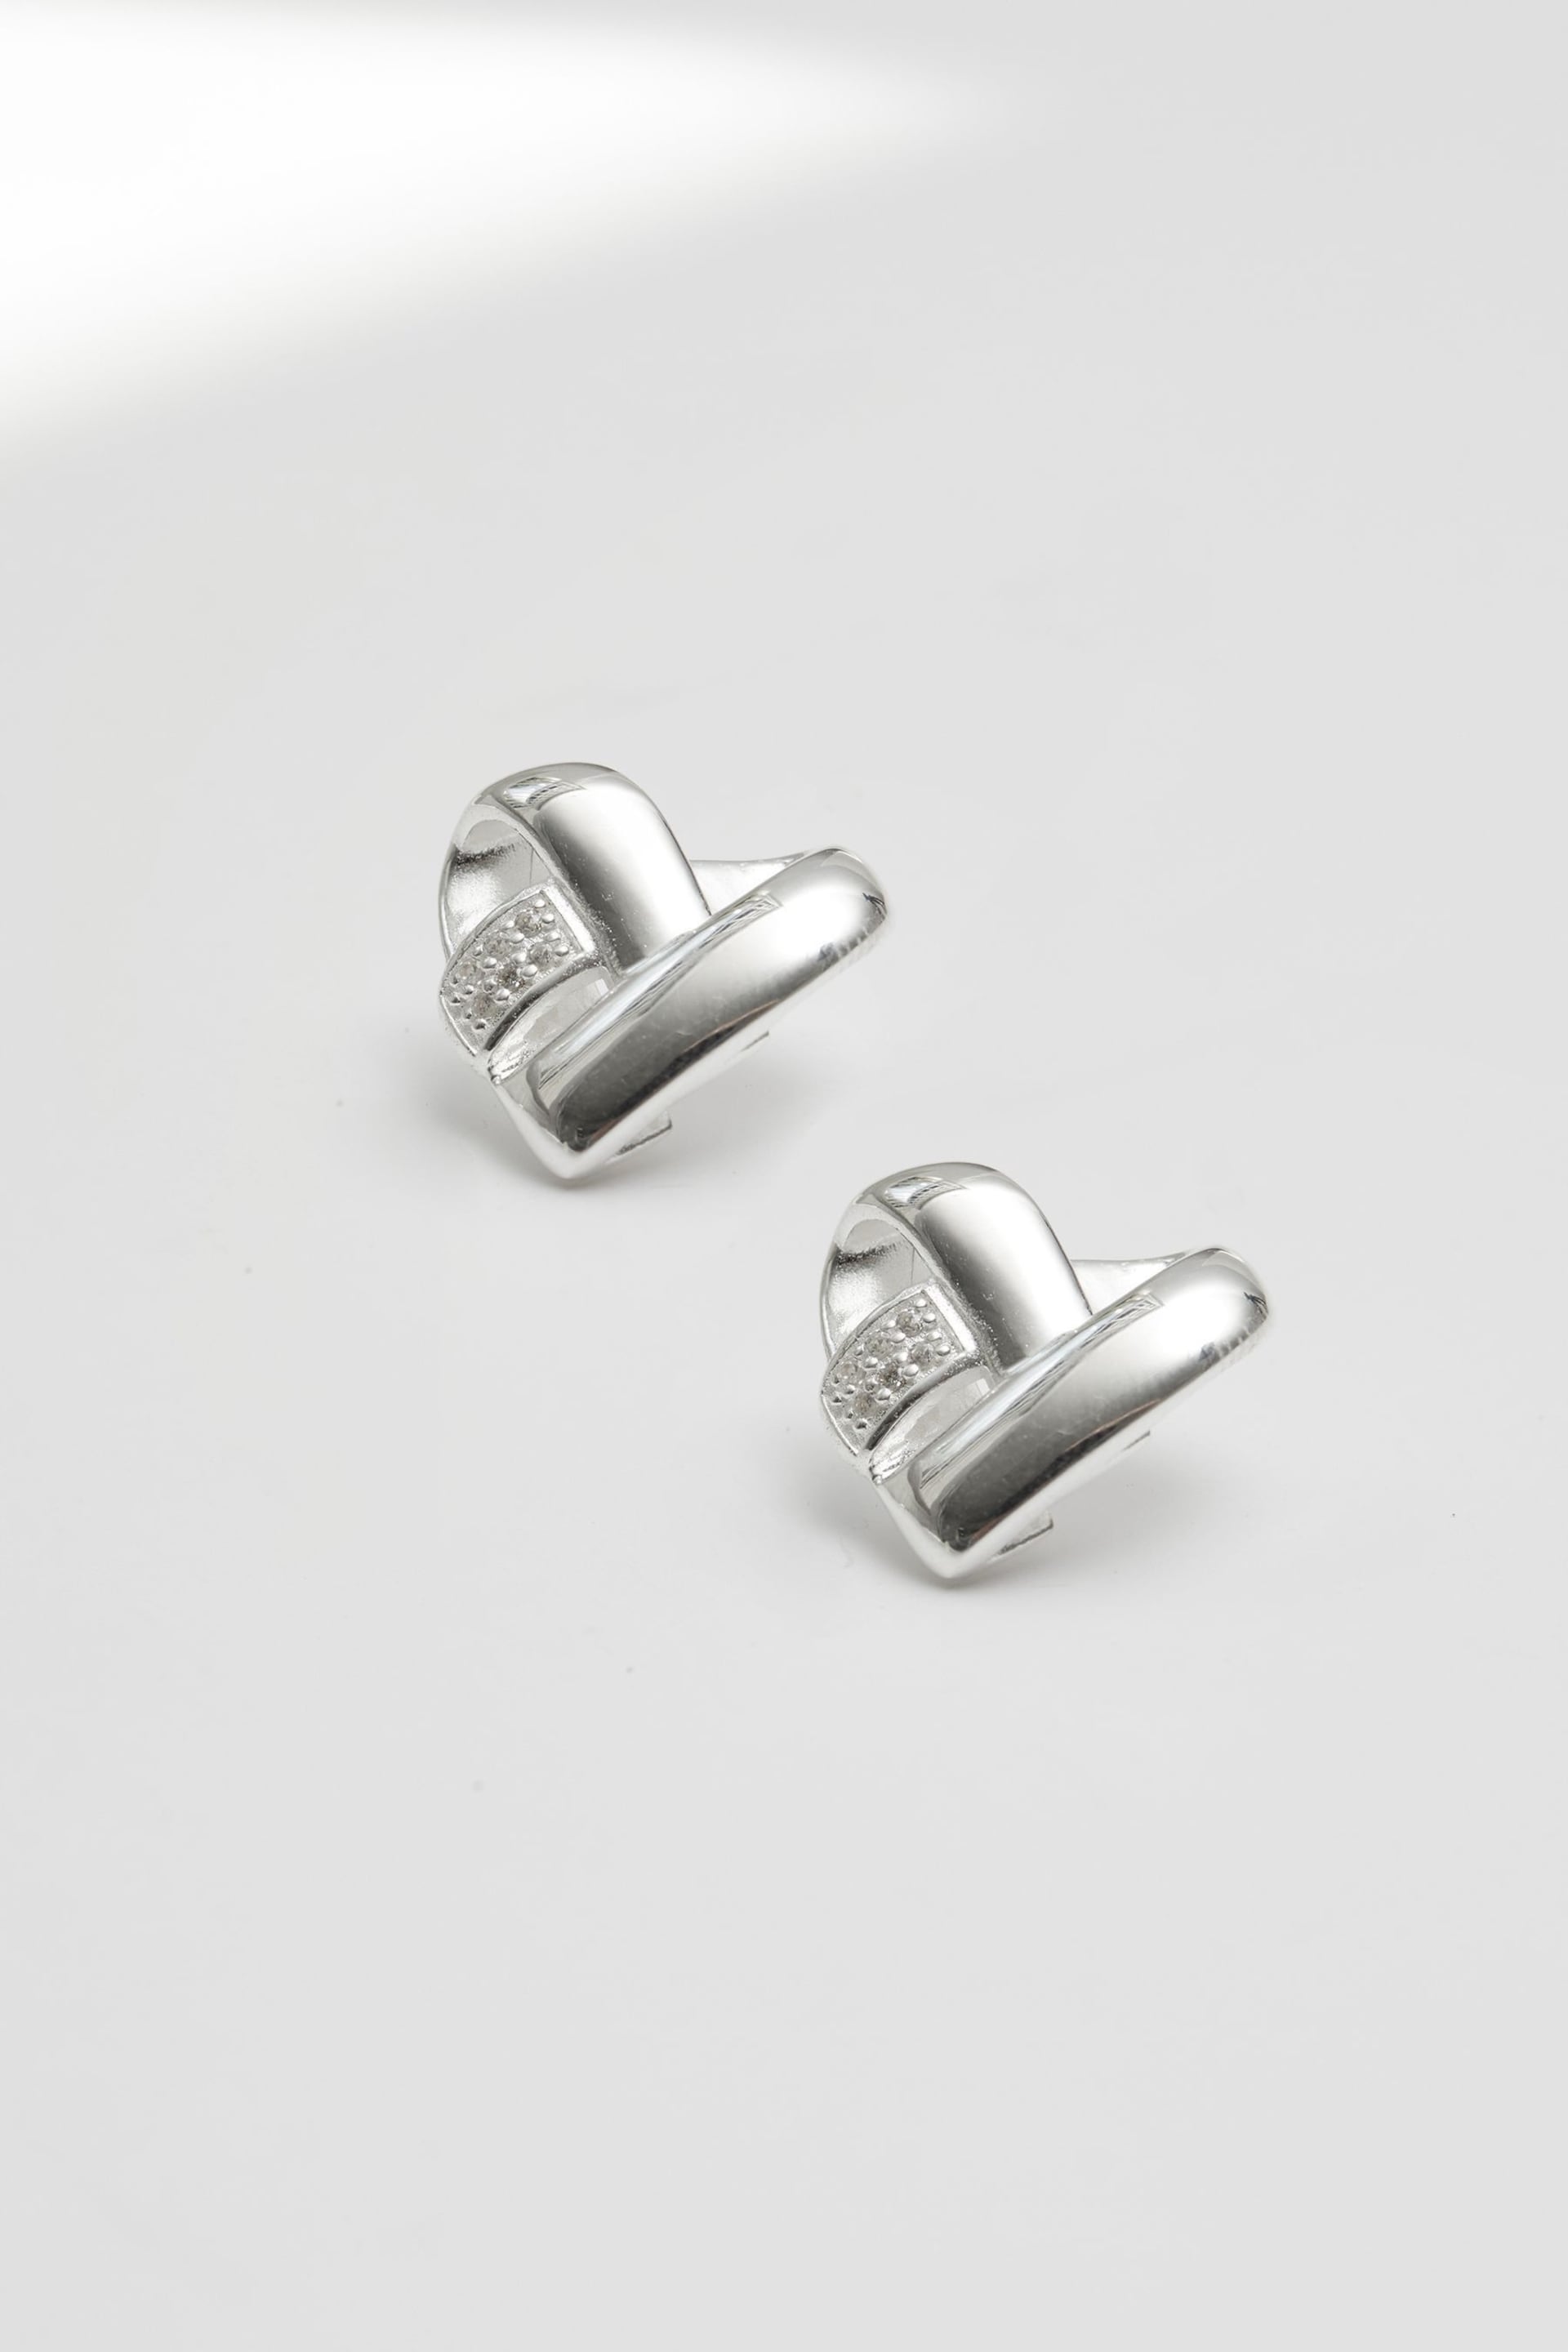 Simply Silver Sterling Silver 925 Knotted Heart Earrings - Image 1 of 3